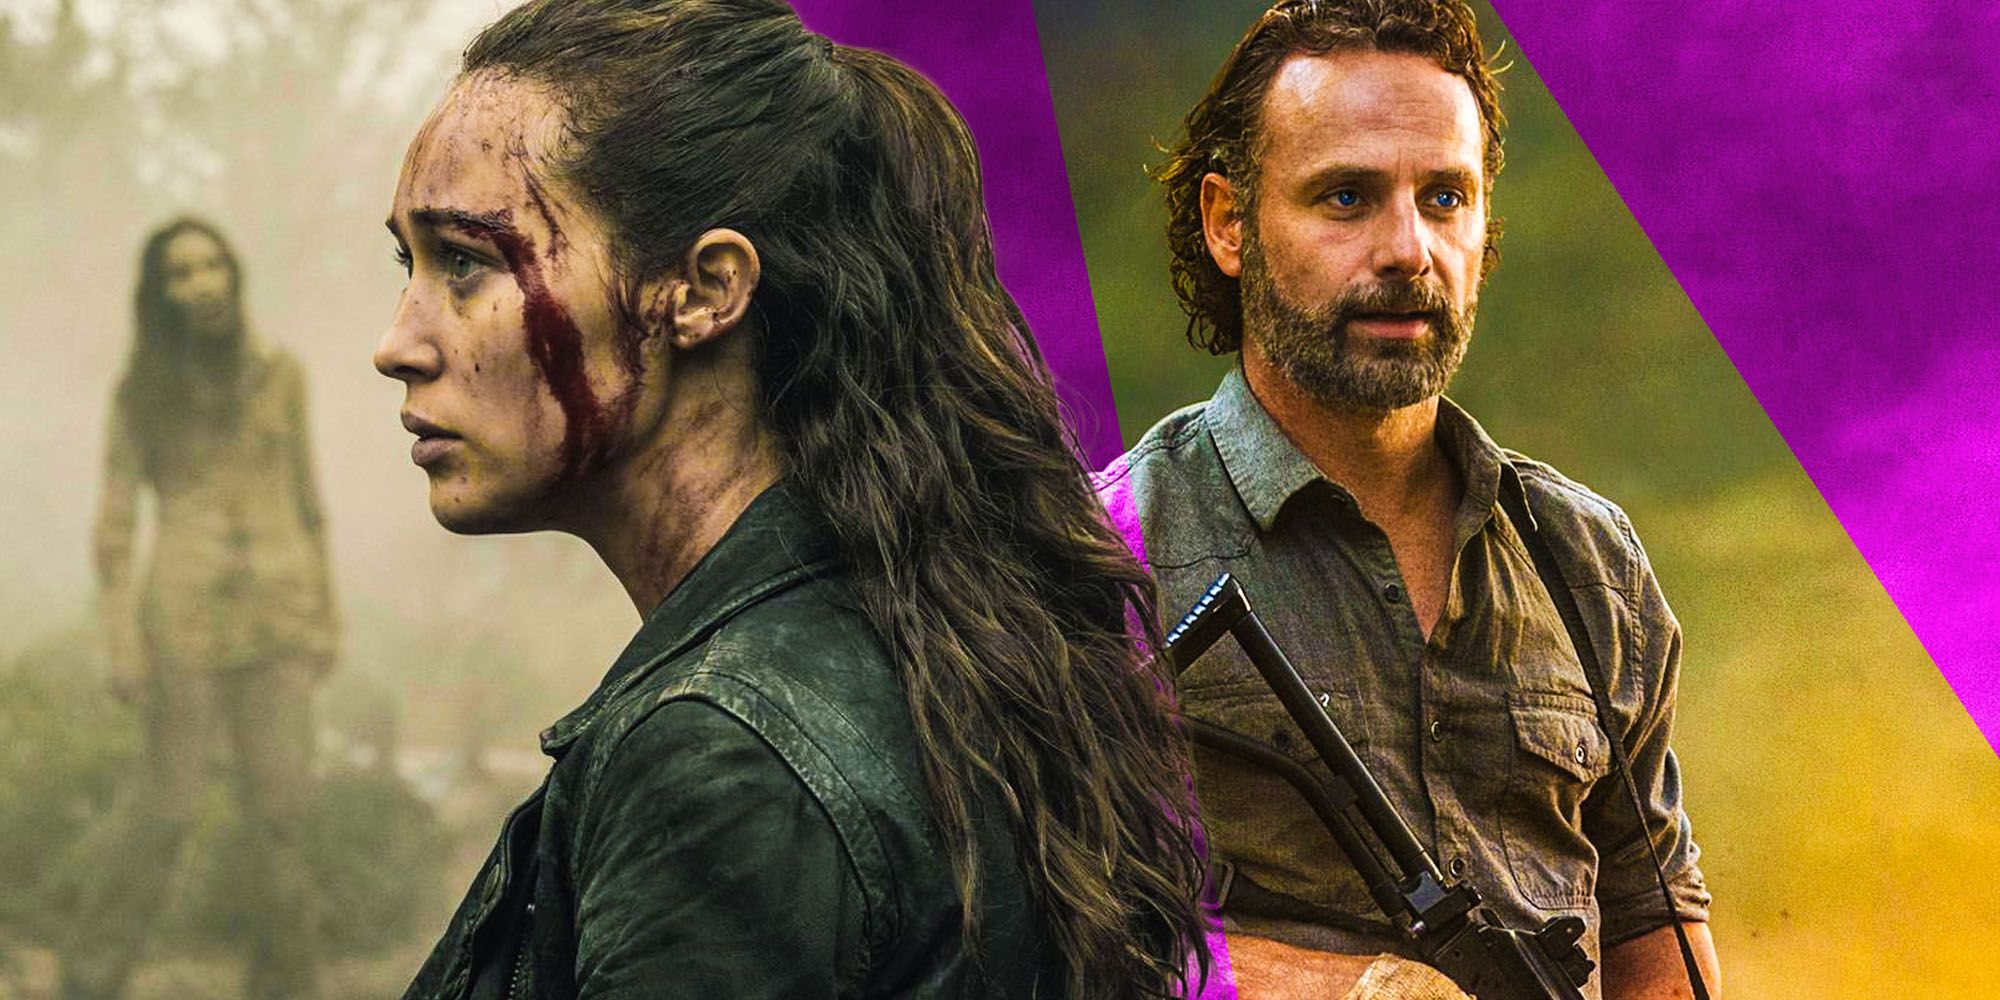 Fear the walking dead season 7 can repeat Rick Grimes Walking Dead Story With Alicia